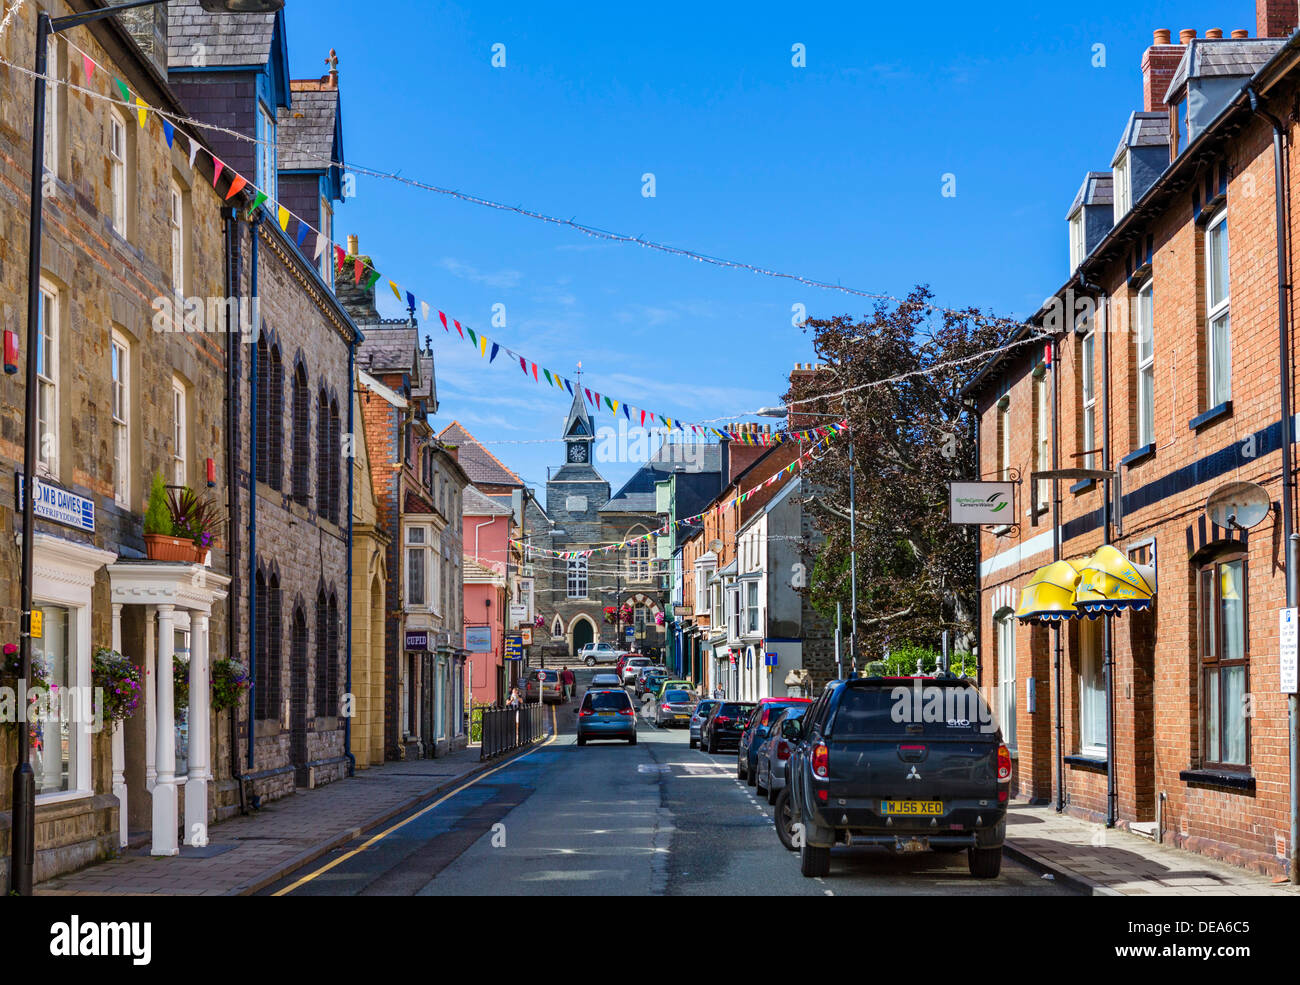 Priory Street looking towards the Guildhall, Cardigan, Ceredigion, Wales, UK Stock Photo